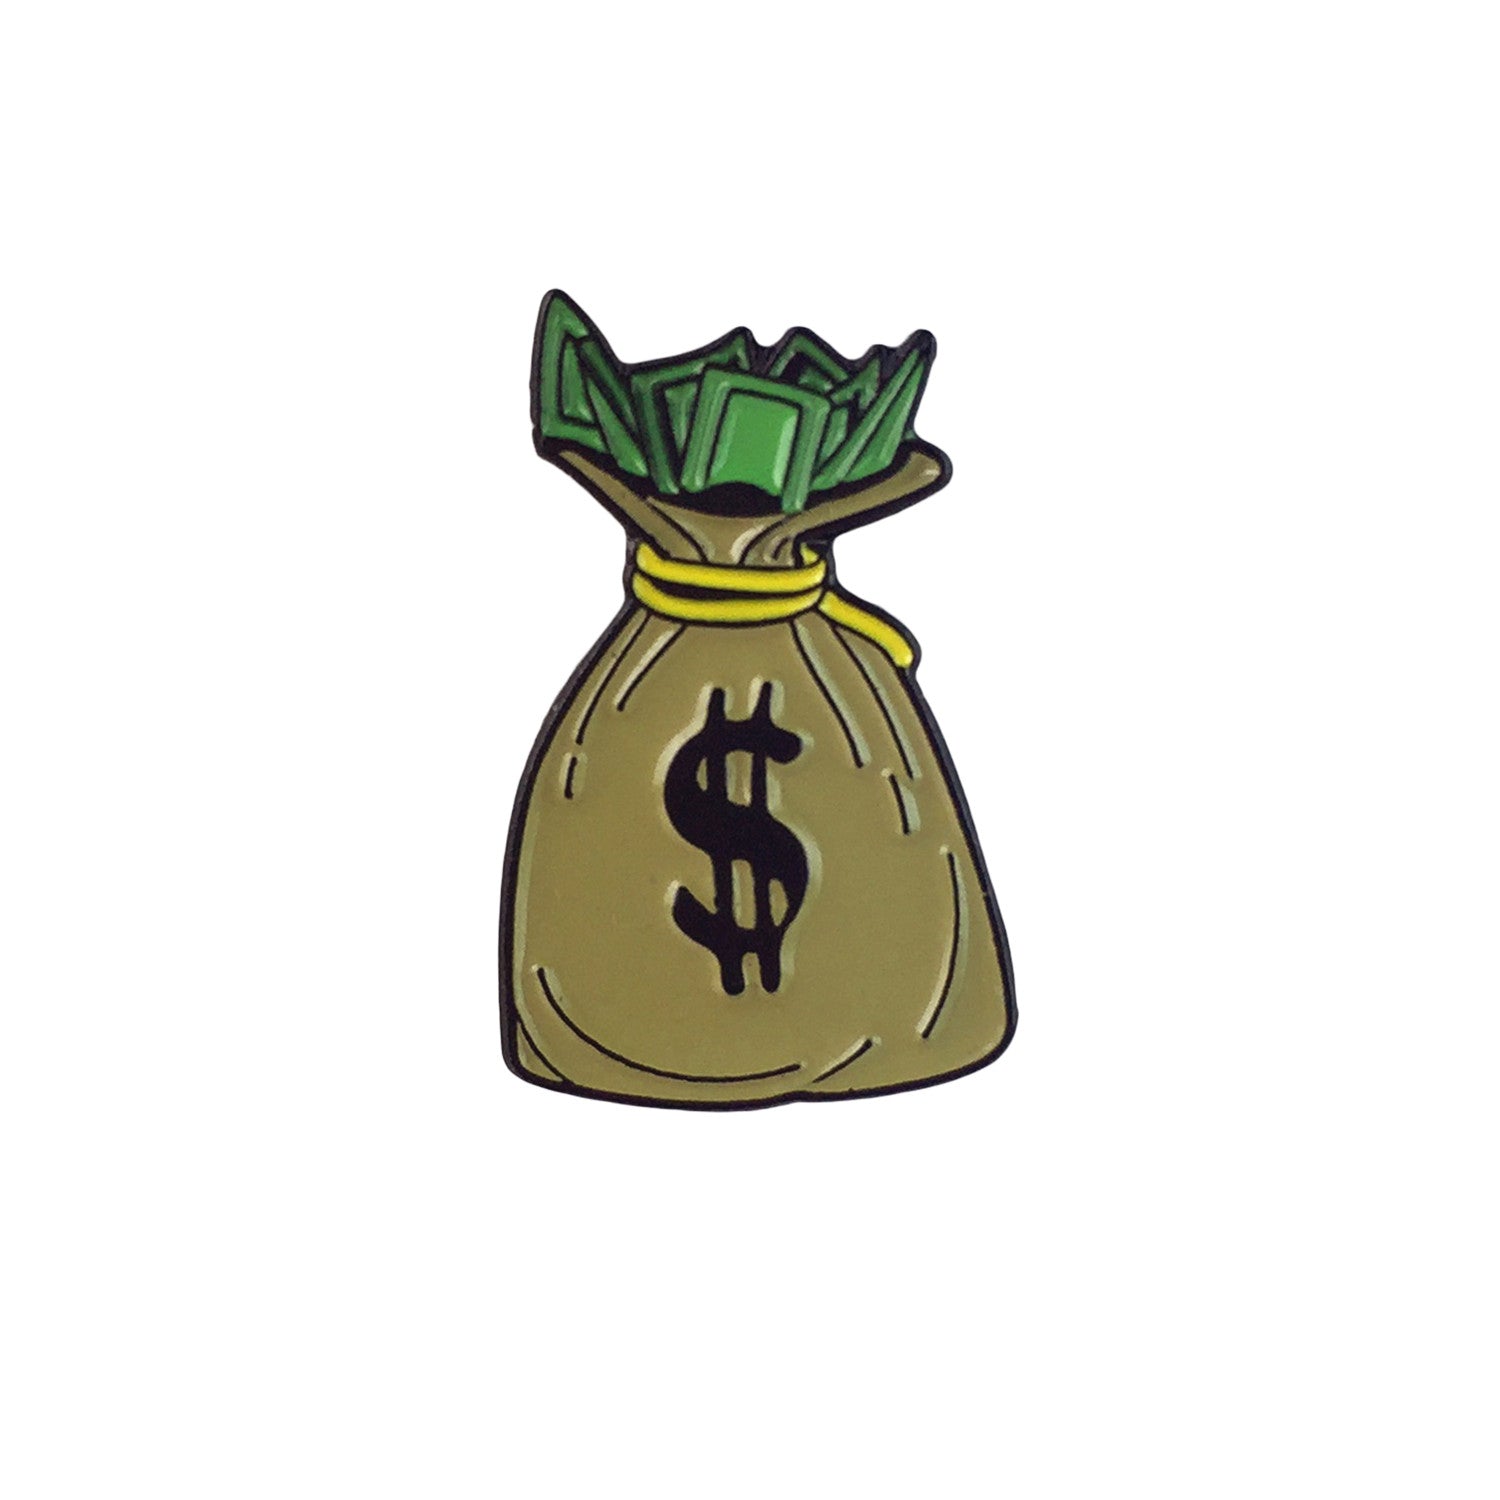 Moneybag Luchainstitute - 2018 lapel pin roblox wikia fandom powered by wikia